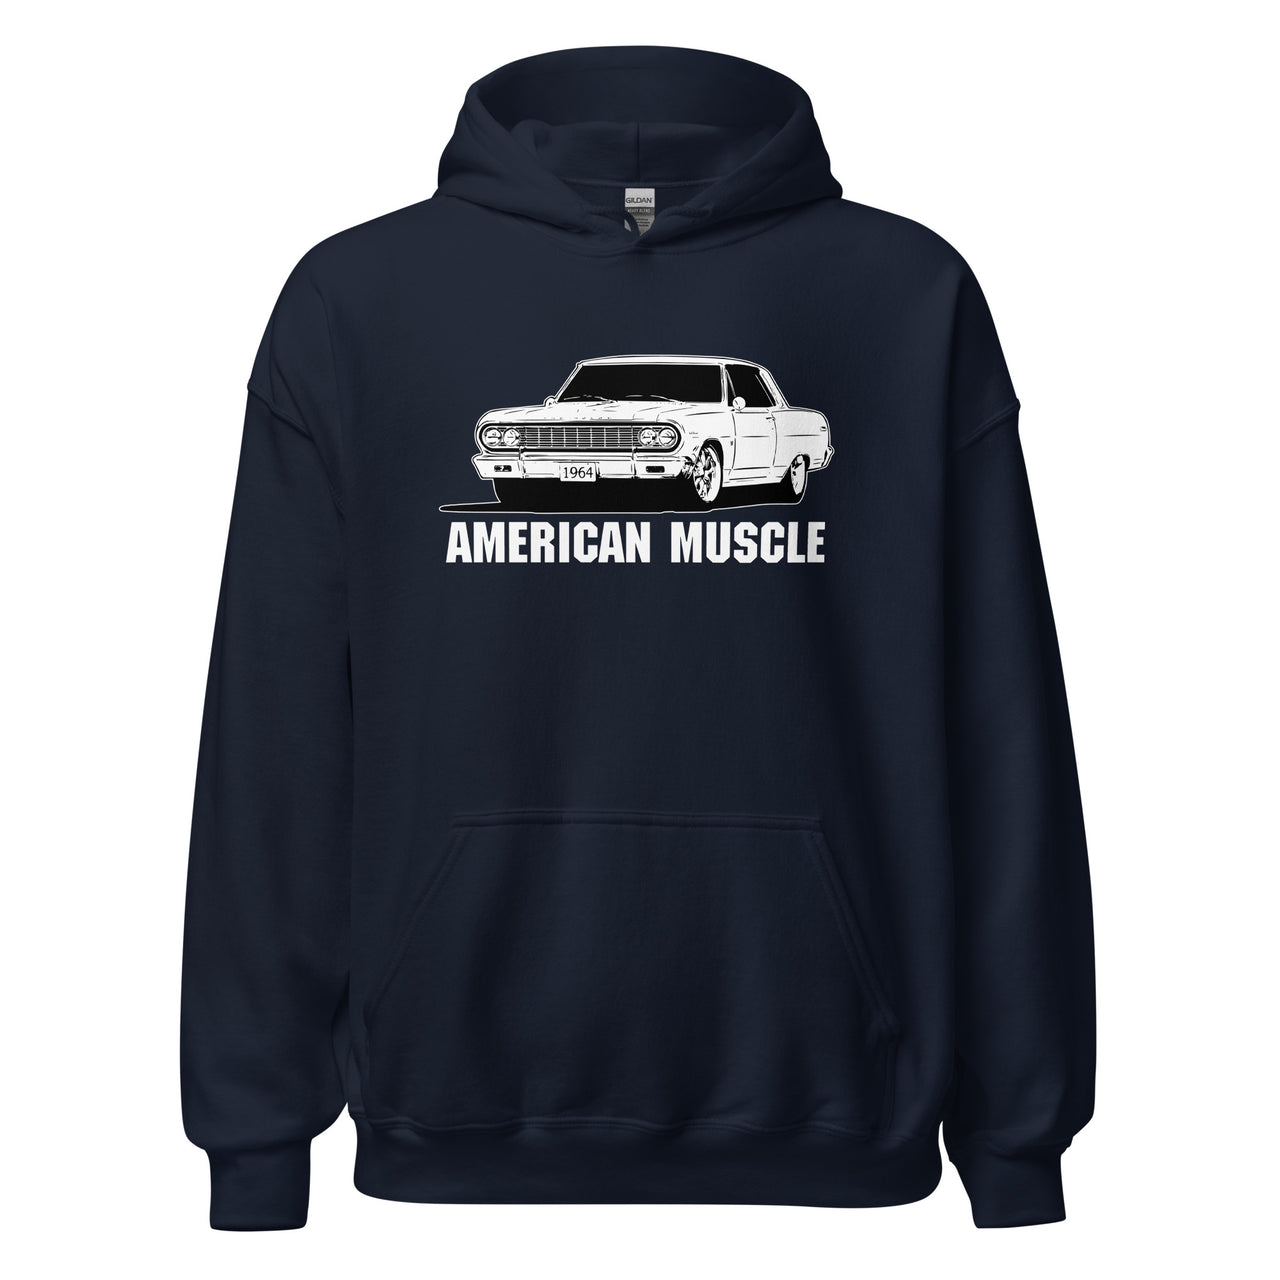 1964 Chevelle Hoodie in navy